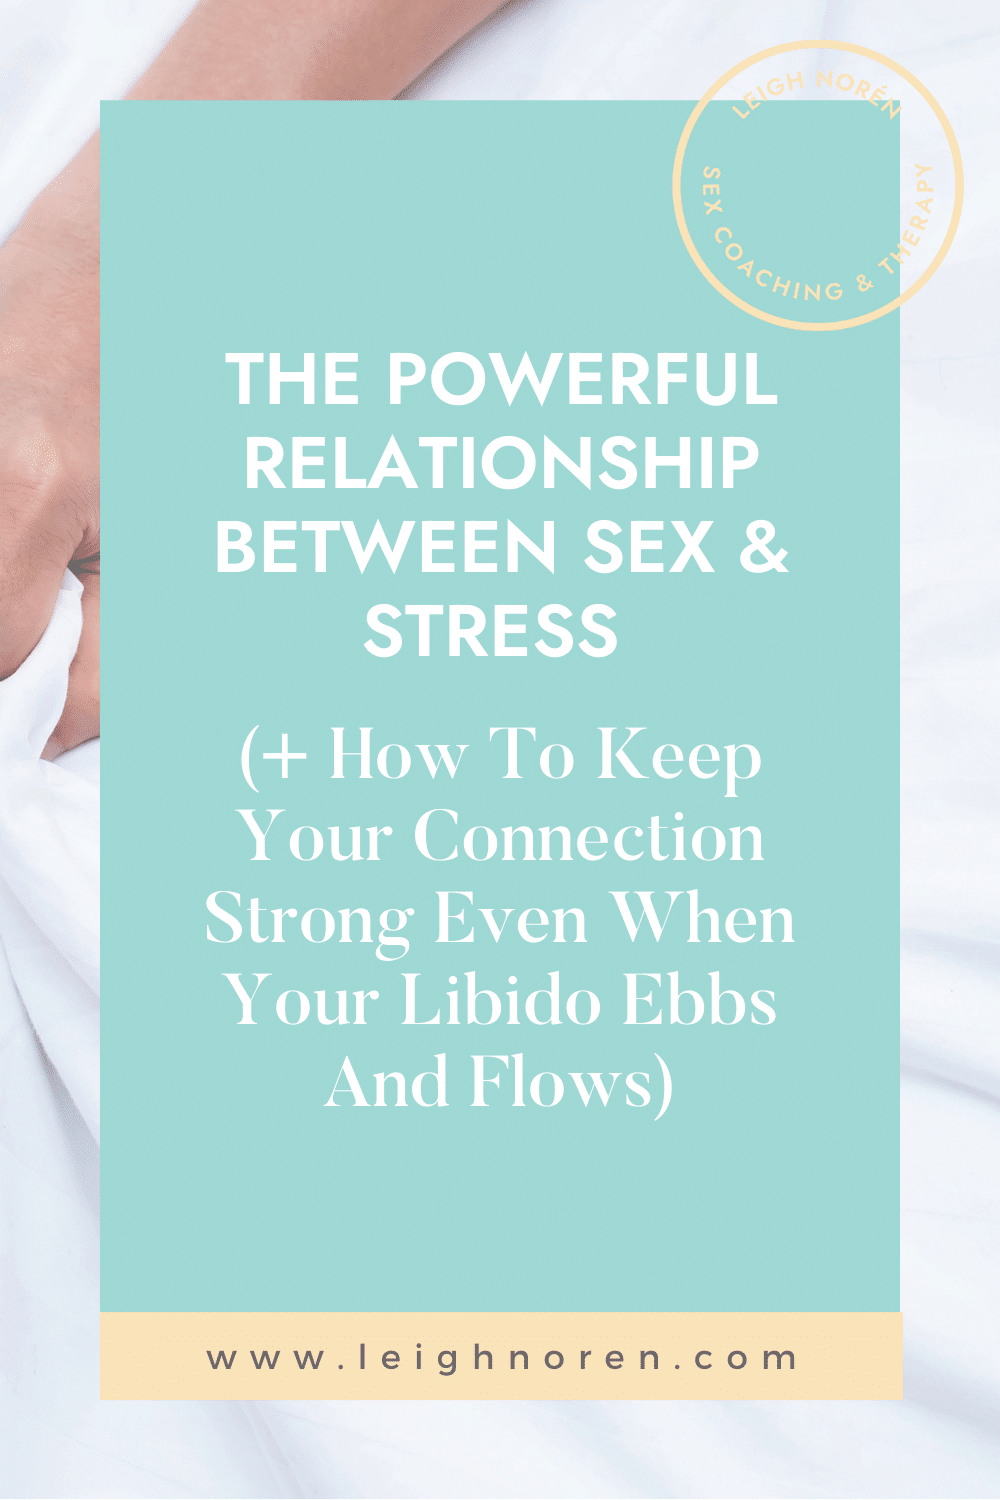 The Powerful Relationship Between Sex & Stress (Plus How To Keep Your Connection Strong Even When Your Libido Ebbs And Flows)